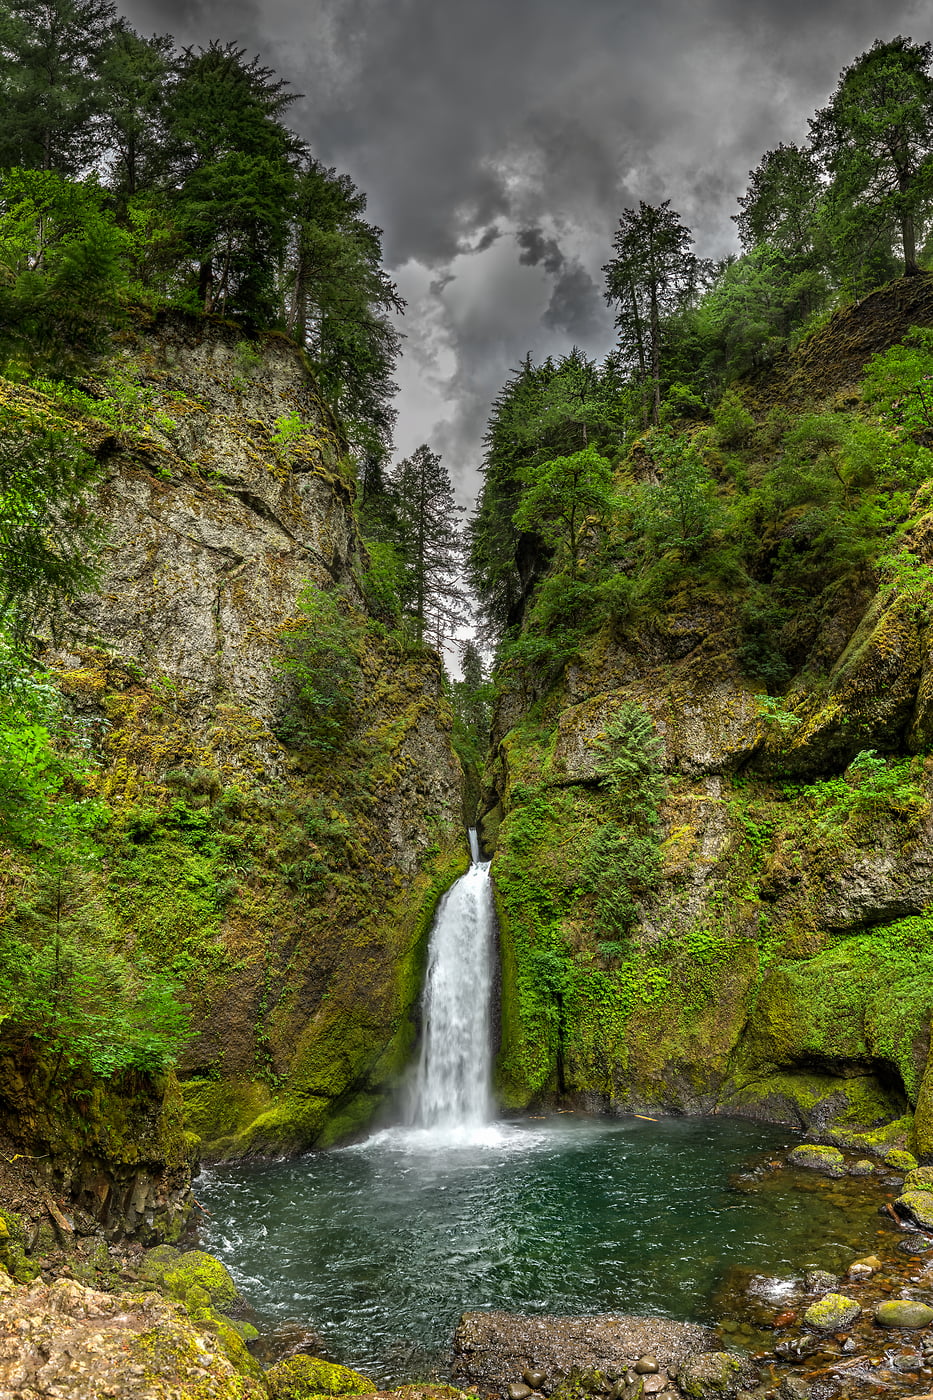 418 megapixels! A very high resolution, large-format VAST photo print of Wahclella Falls created by Tim Lo Monaco in Columbia River Gorge, Oregon